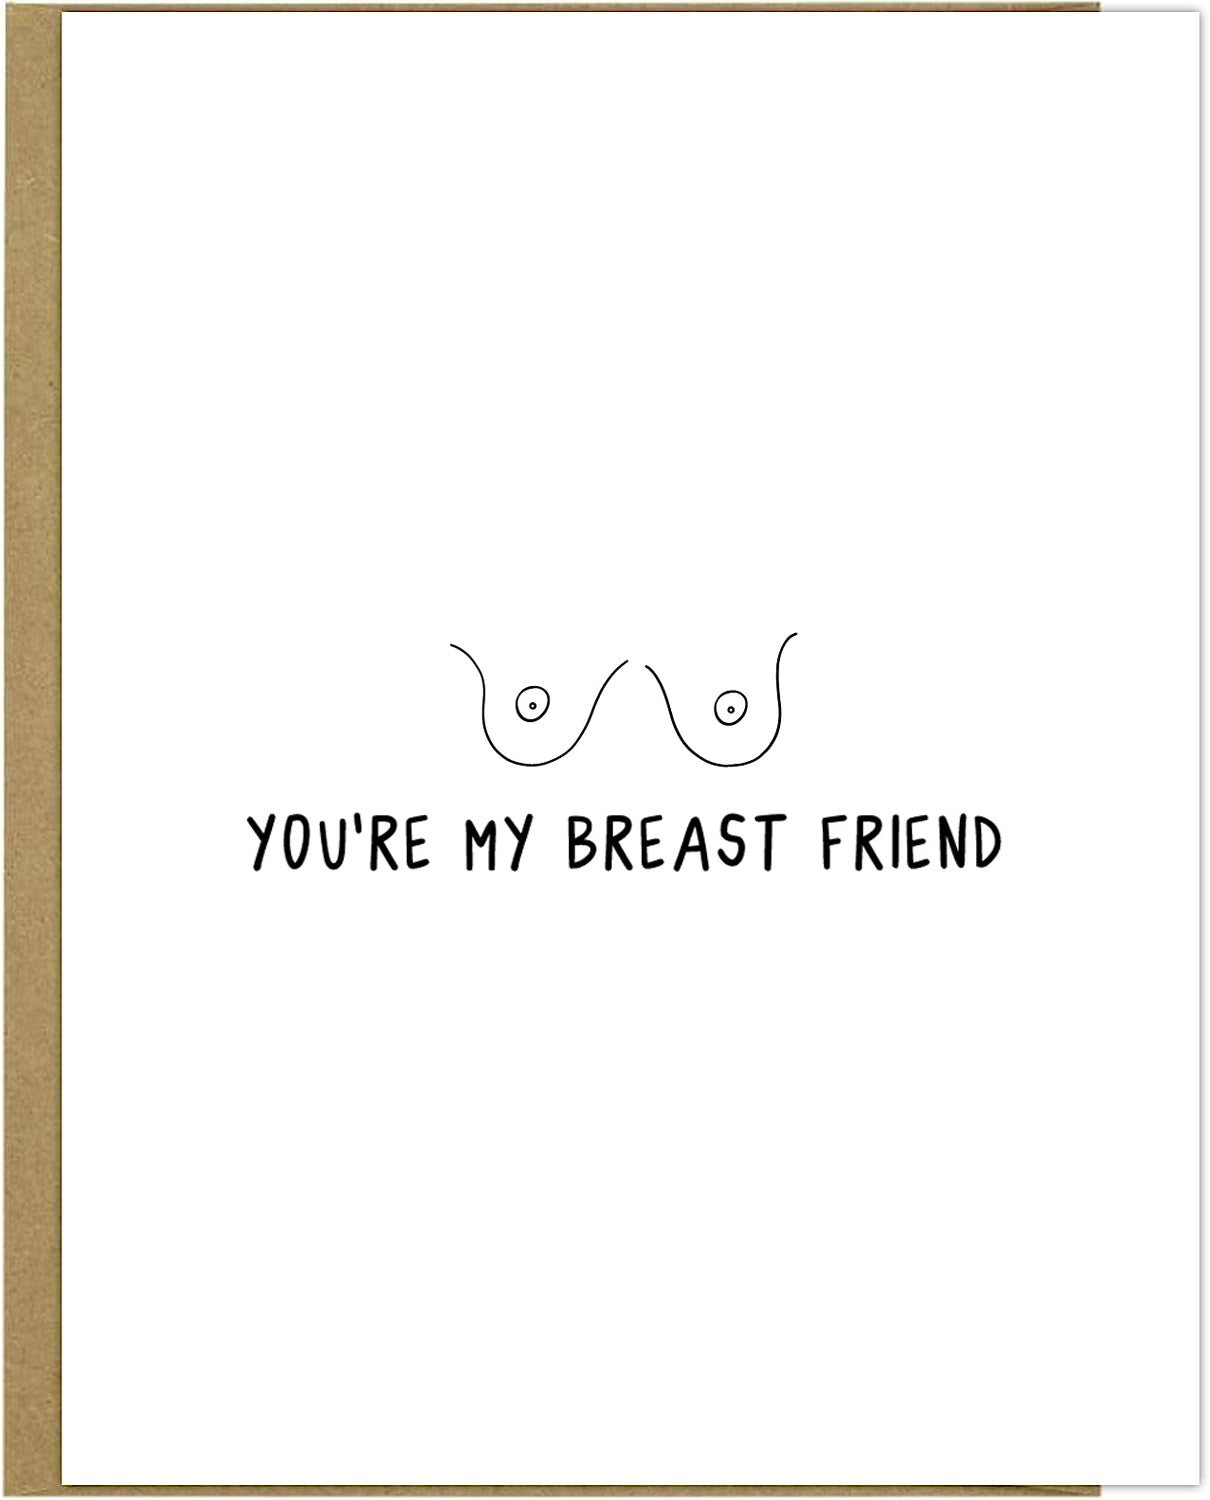 Send a heartfelt message to your Breast Friend with rockdoodles' charming Breast Friend Card. Complete with a matching envelope, this card is perfect for showing your appreciation and love.